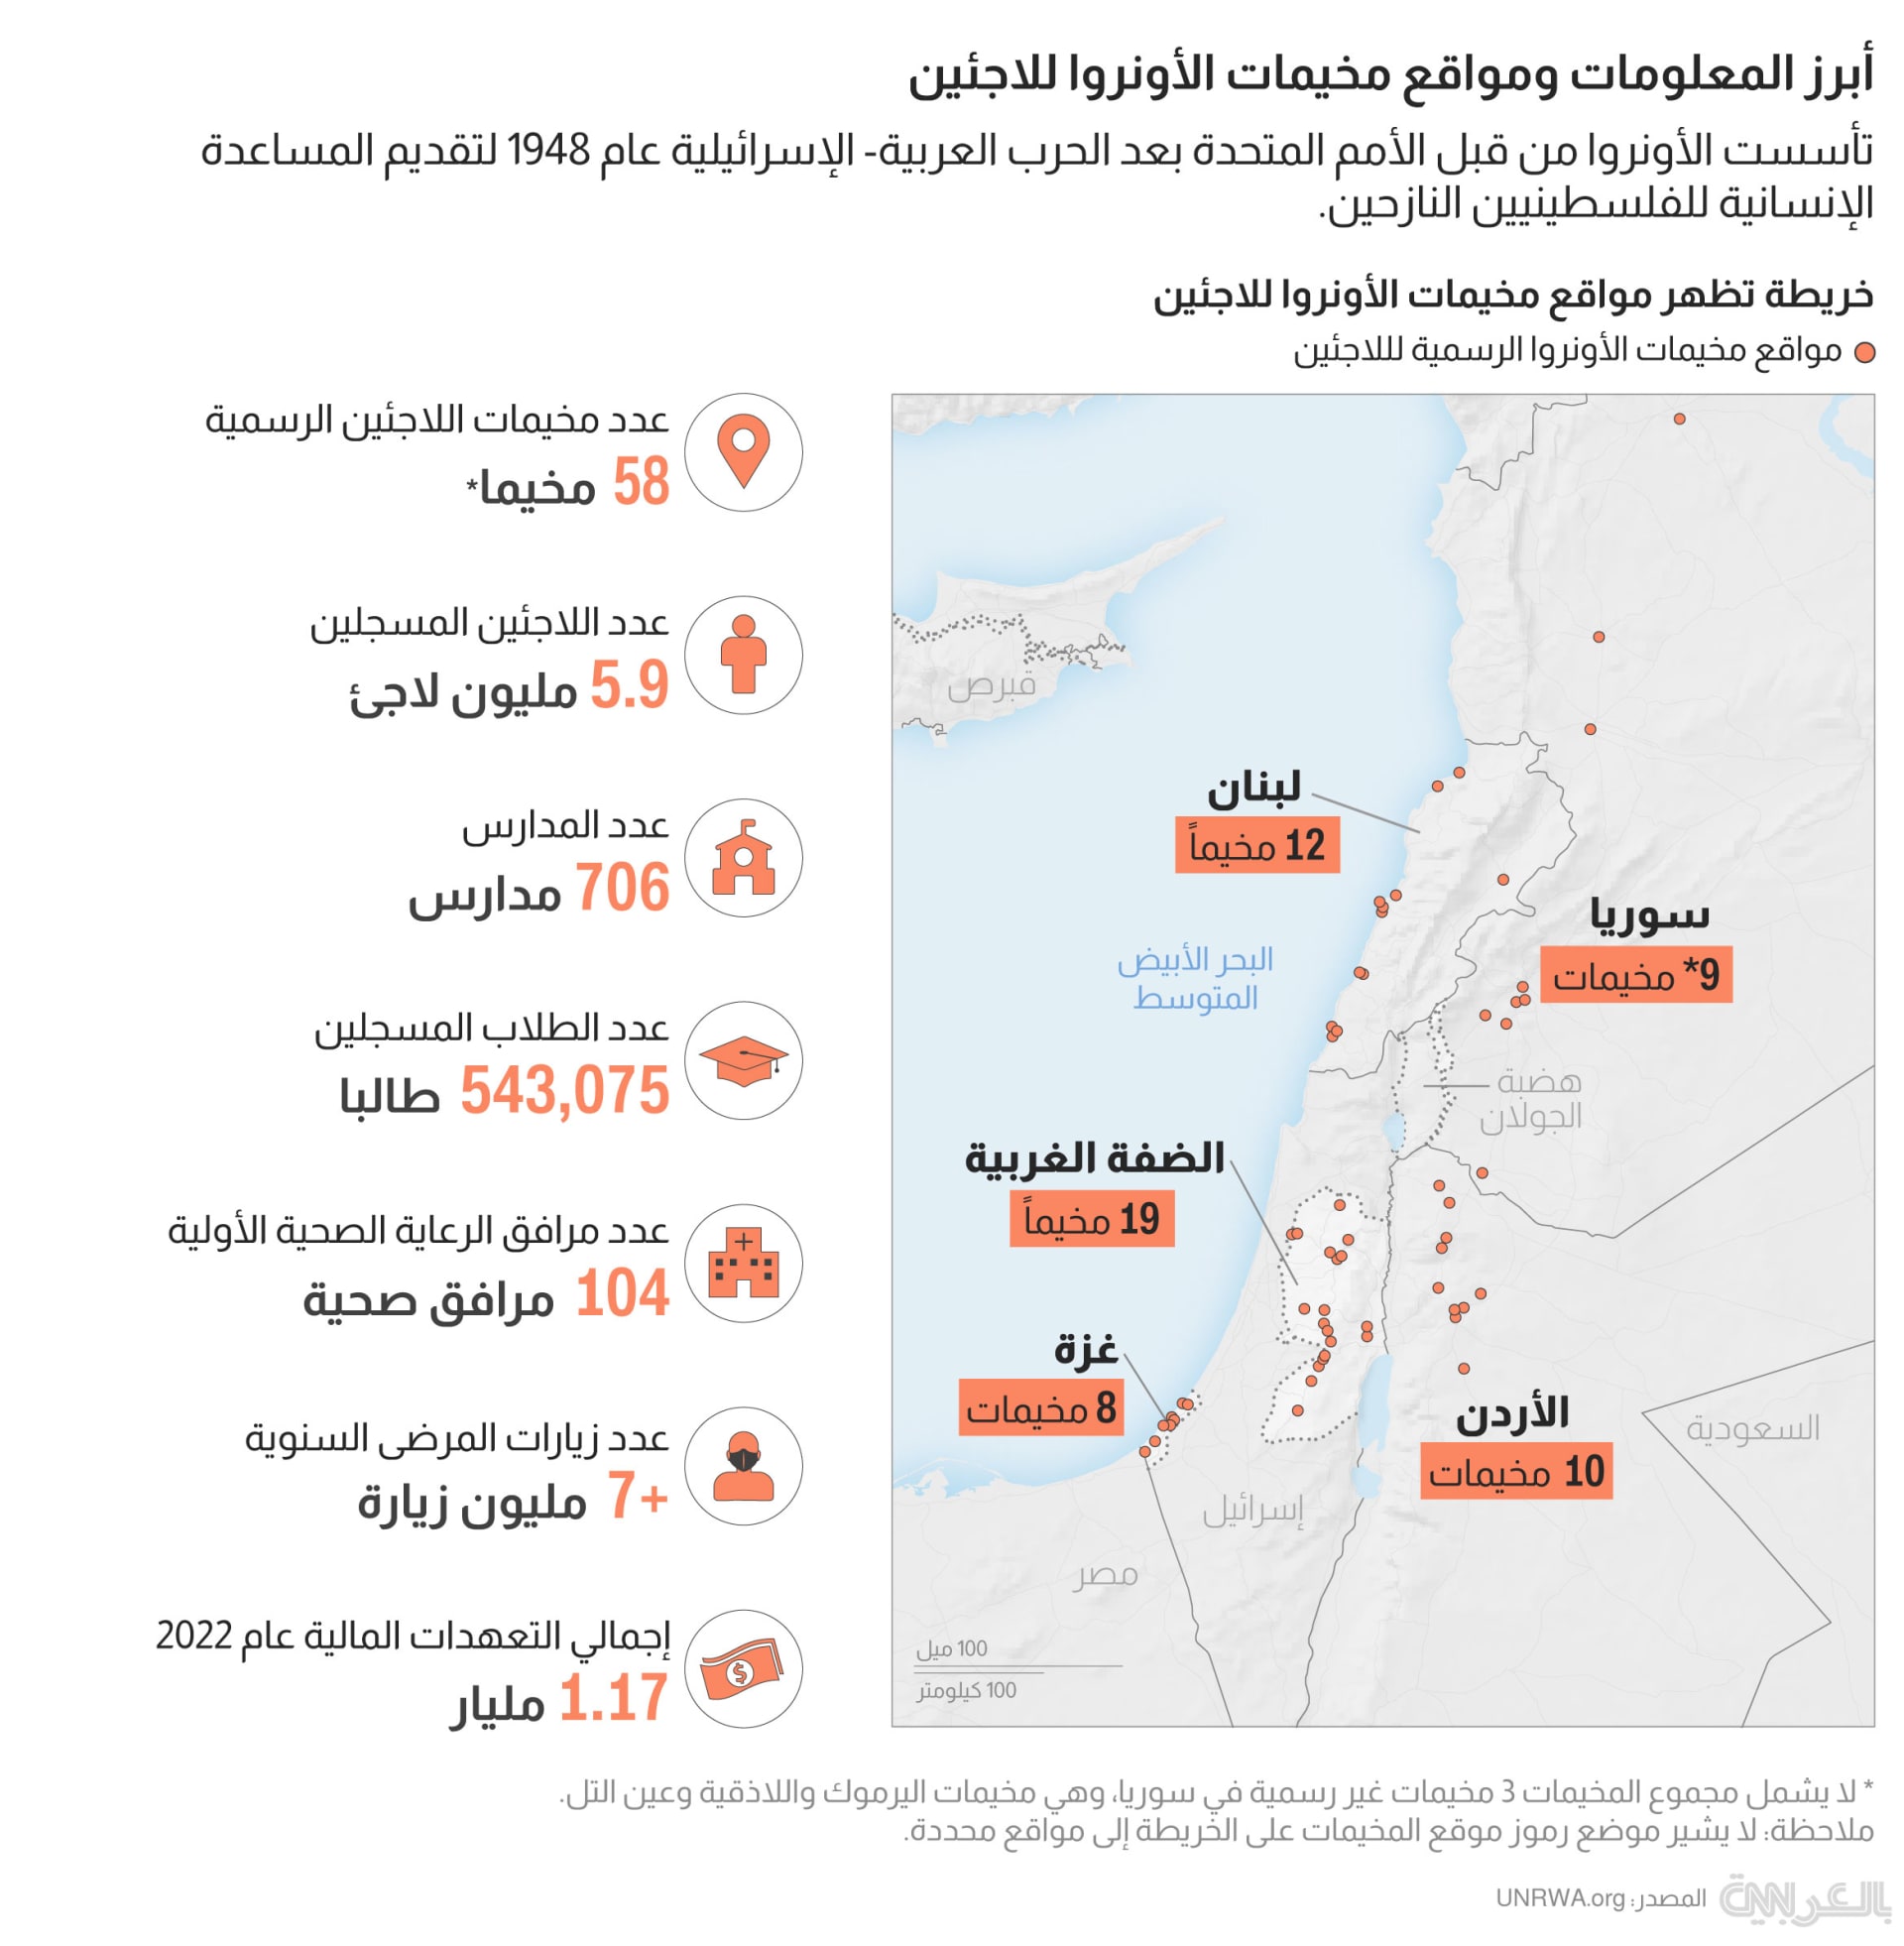 unrwa-facts-facts-location